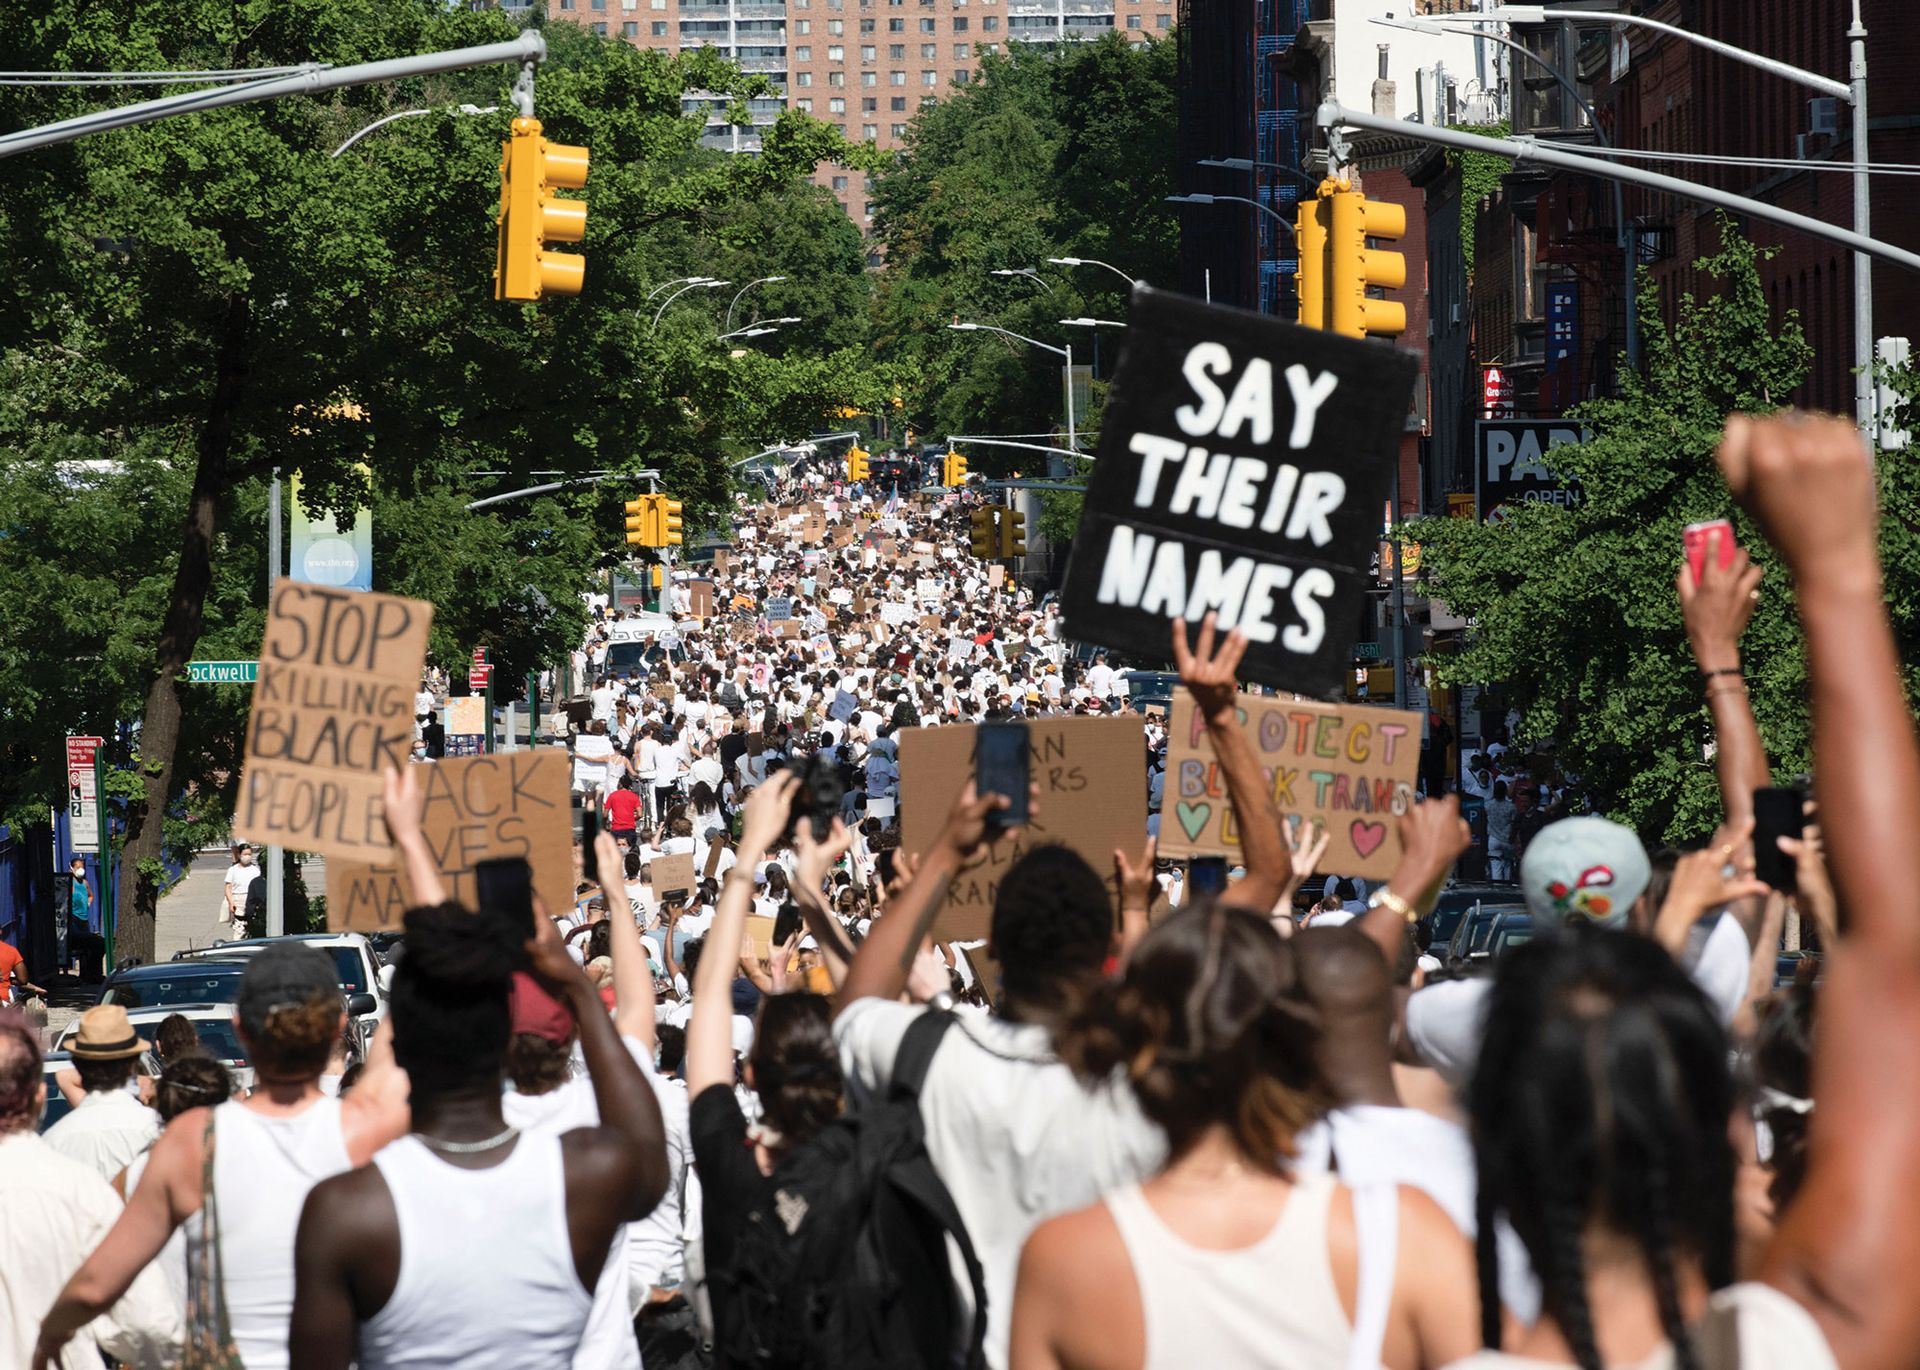 Thousands filled the streets in a Black Trans Lives Matter demonstration in Brooklyn last June Photo: © Michael Noble Jr./Getty Images